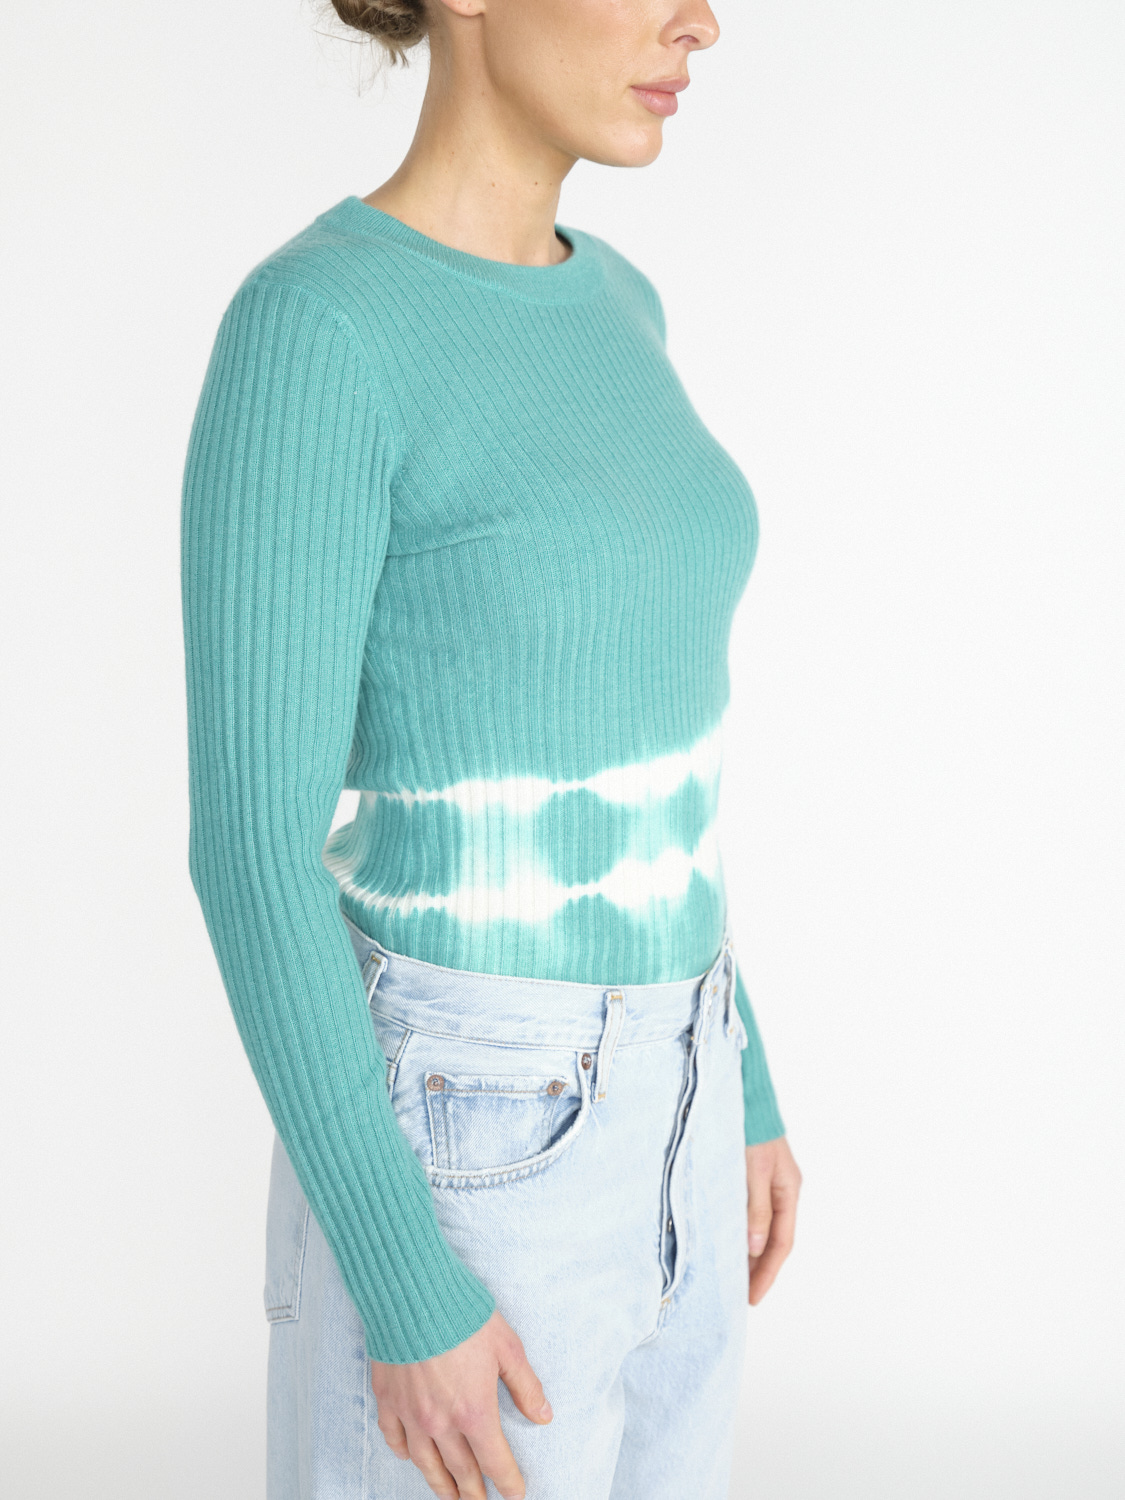 Kujten Bibi ribbed cashmere sweater with tie-dye details  mint XS/S